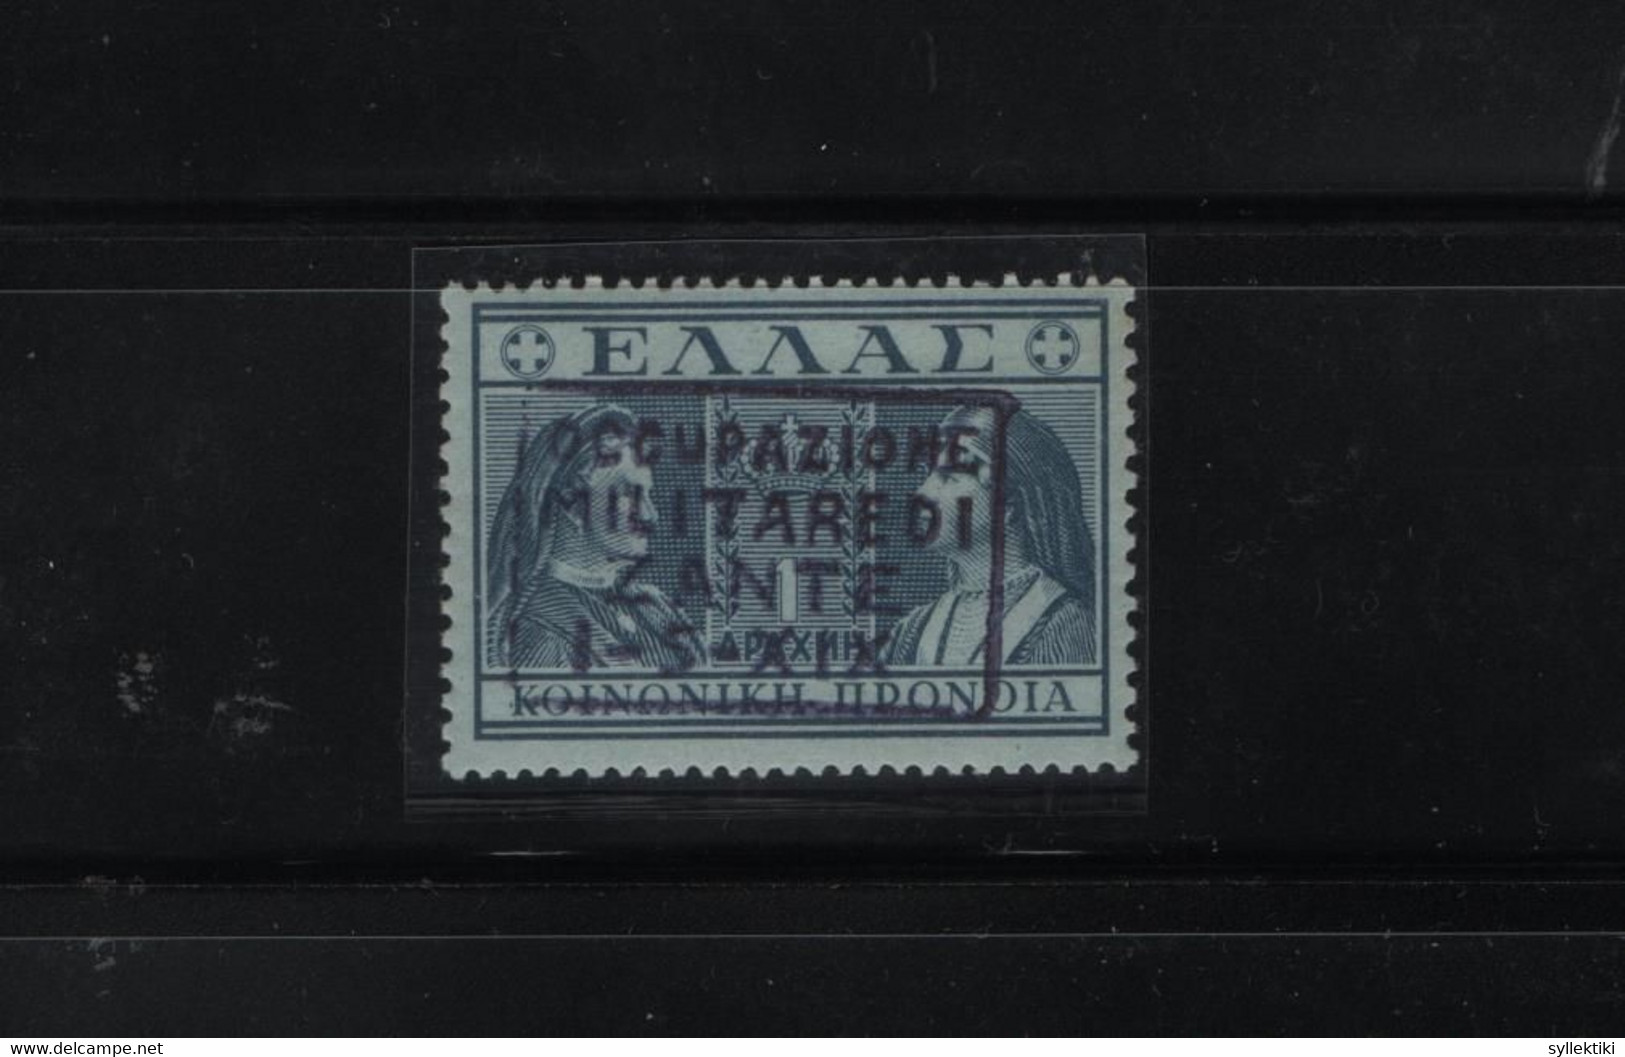 GREECE 1941 ZANTE OVERPRINT ON CHARITY ISSUE 1 DRACHMA MNH STAMP     HELLAS No 306 AND VALUE  EURO 900.00++ - Ionische Eilanden